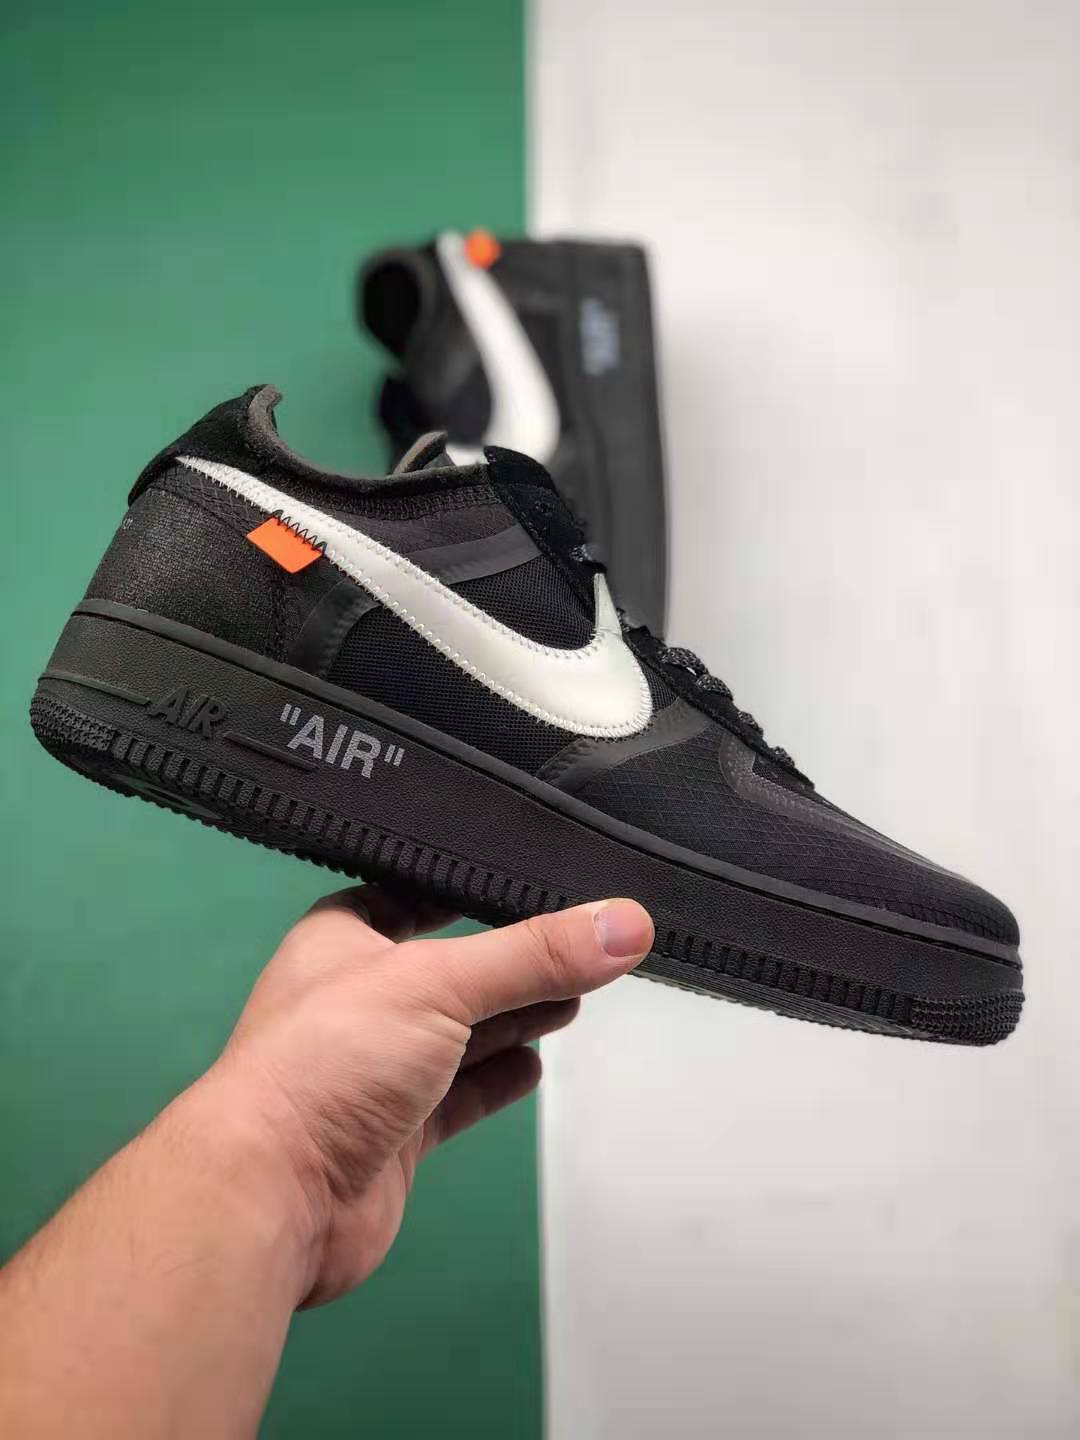 Nike Off-White x Air Force 1 Low 'Black' AO4606-001 - Exclusive Collaboration Sneaker